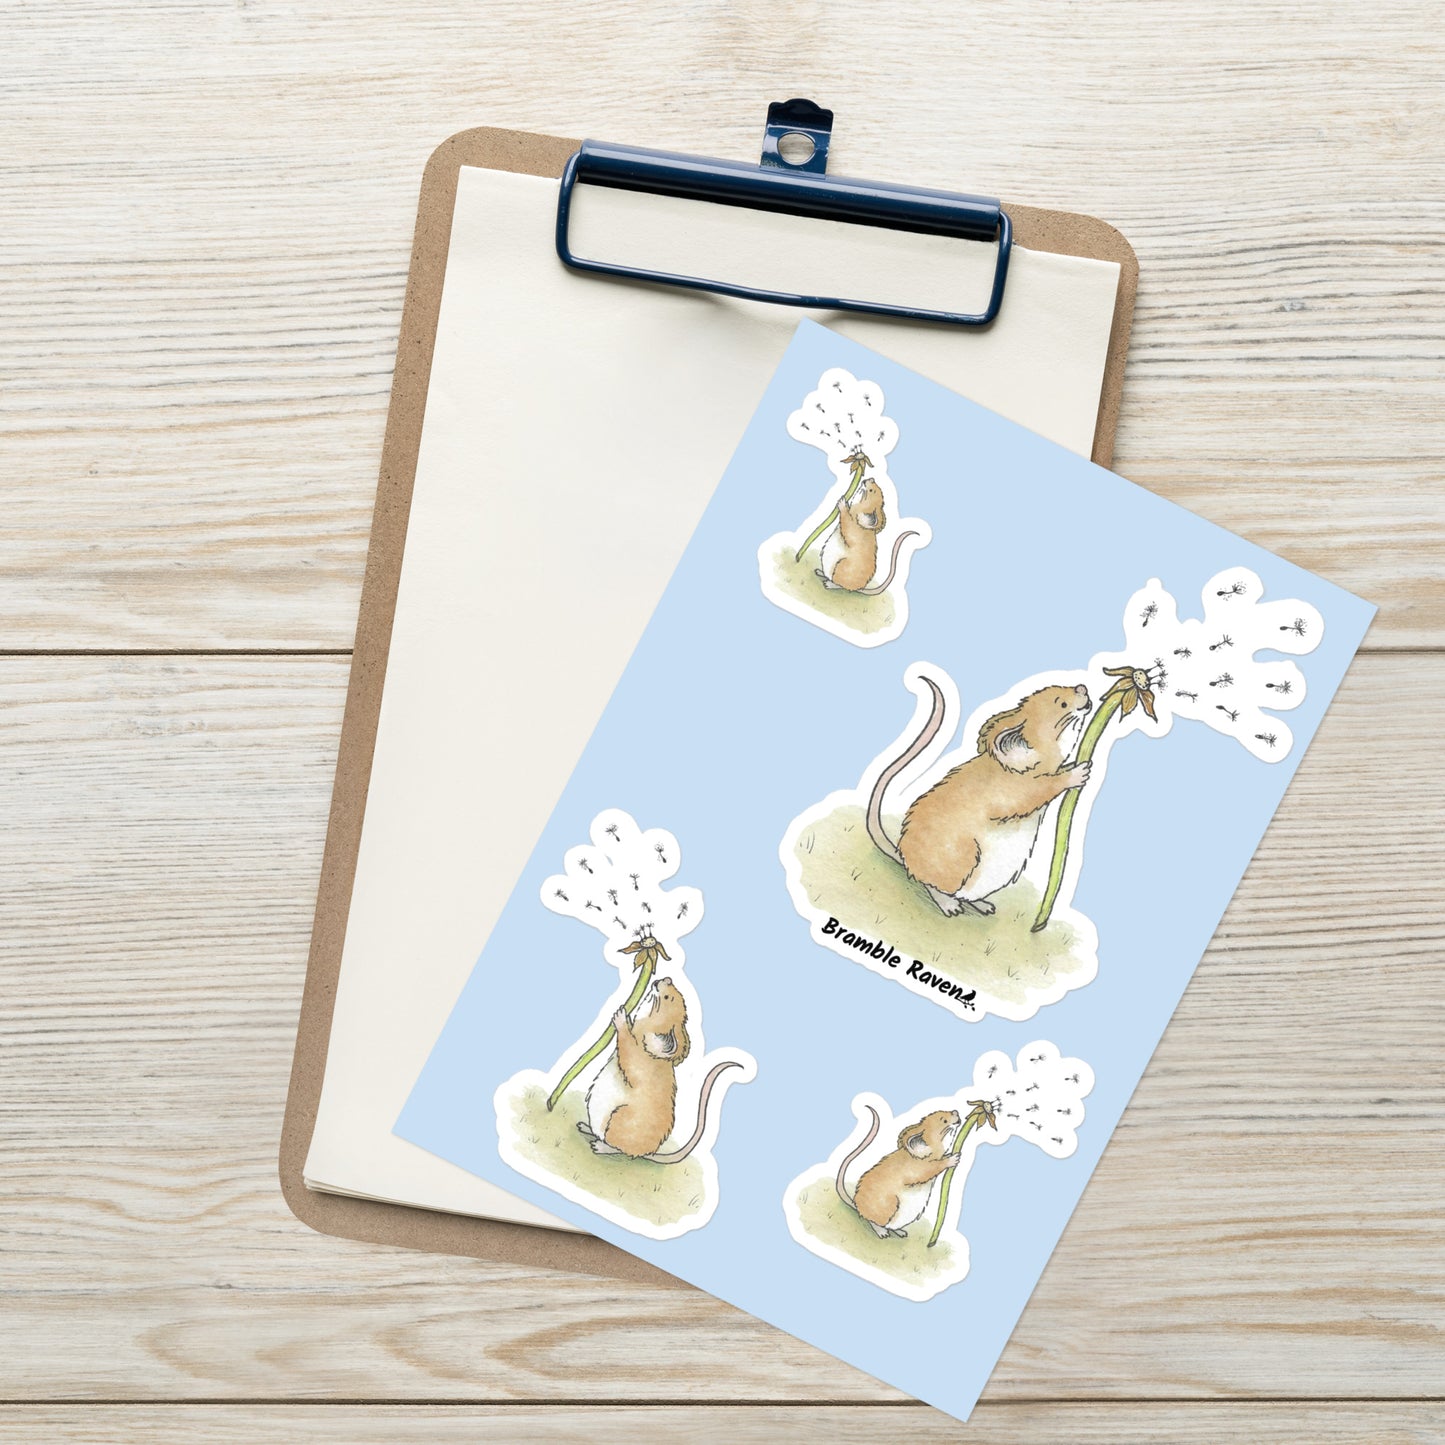 Original Dandelion Wish design of cute watercolor mouse blowing dandelion seeds. Glossy sticker sheet with four mice in different sizes and directions. Each sticker is kiss cut with a white border.  Shown on clipboard.